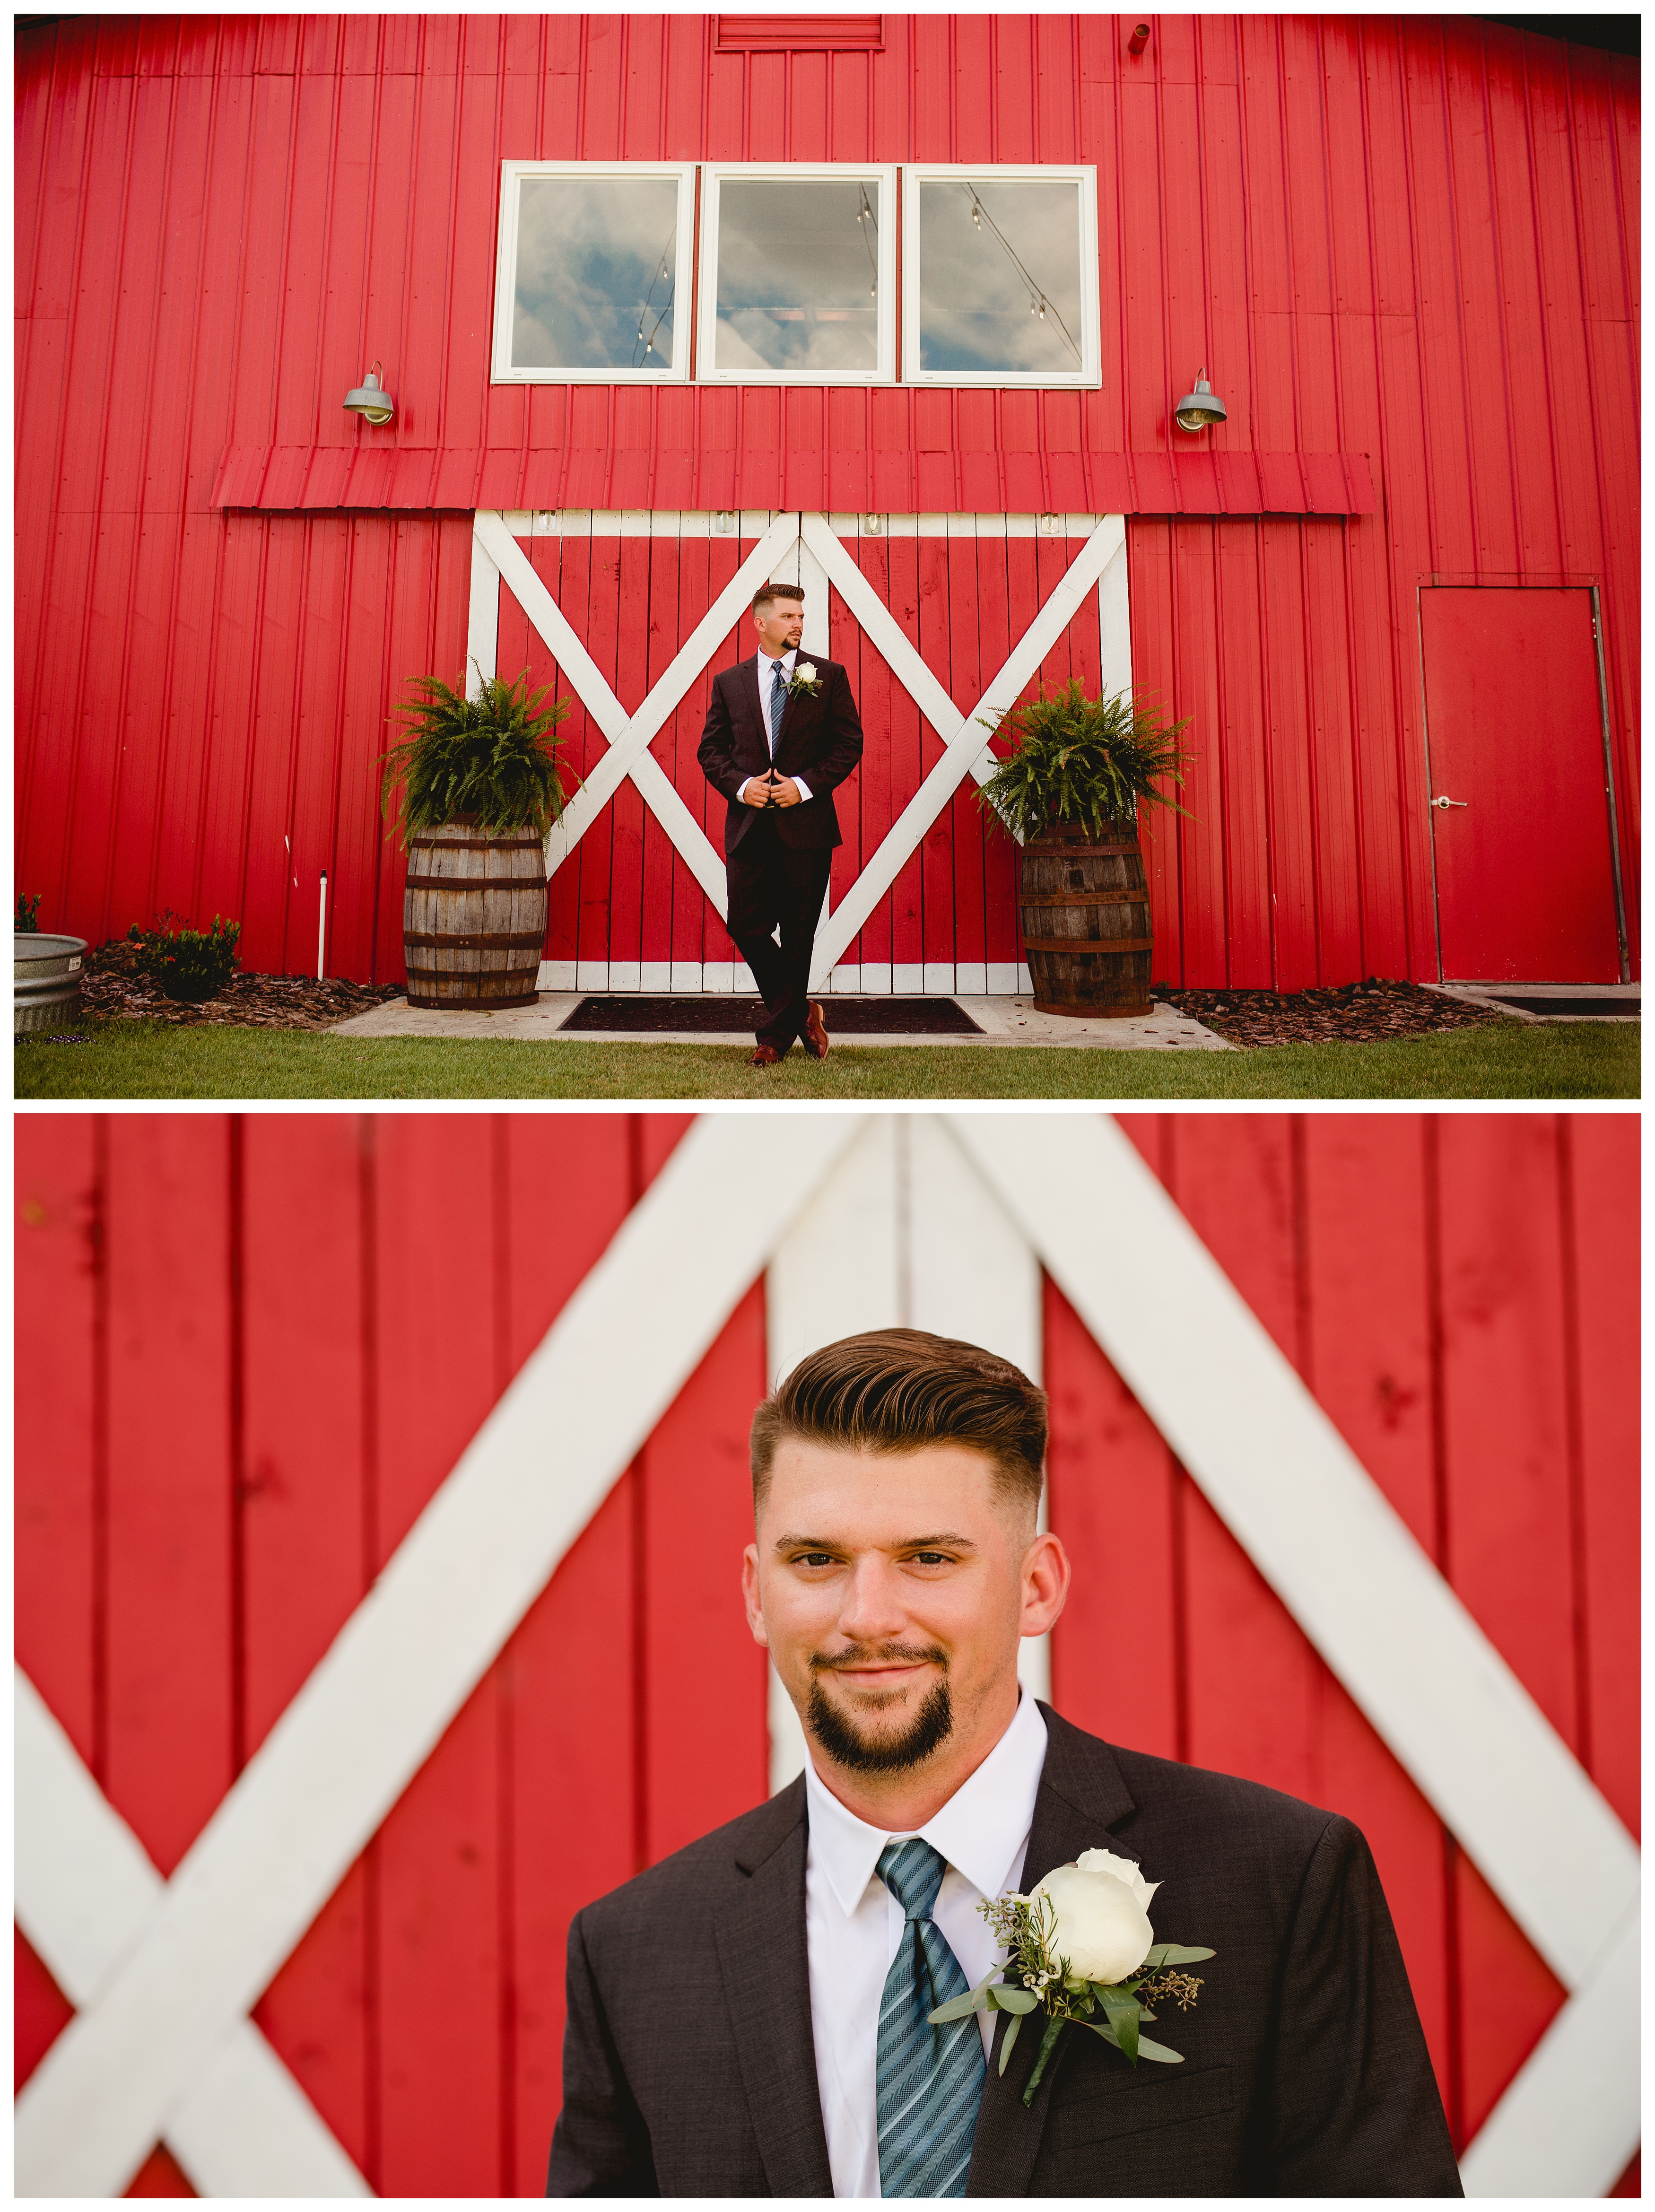 Photos of the groom on his wedding day at Seven Hills Farm. Photographer Shelly Williams